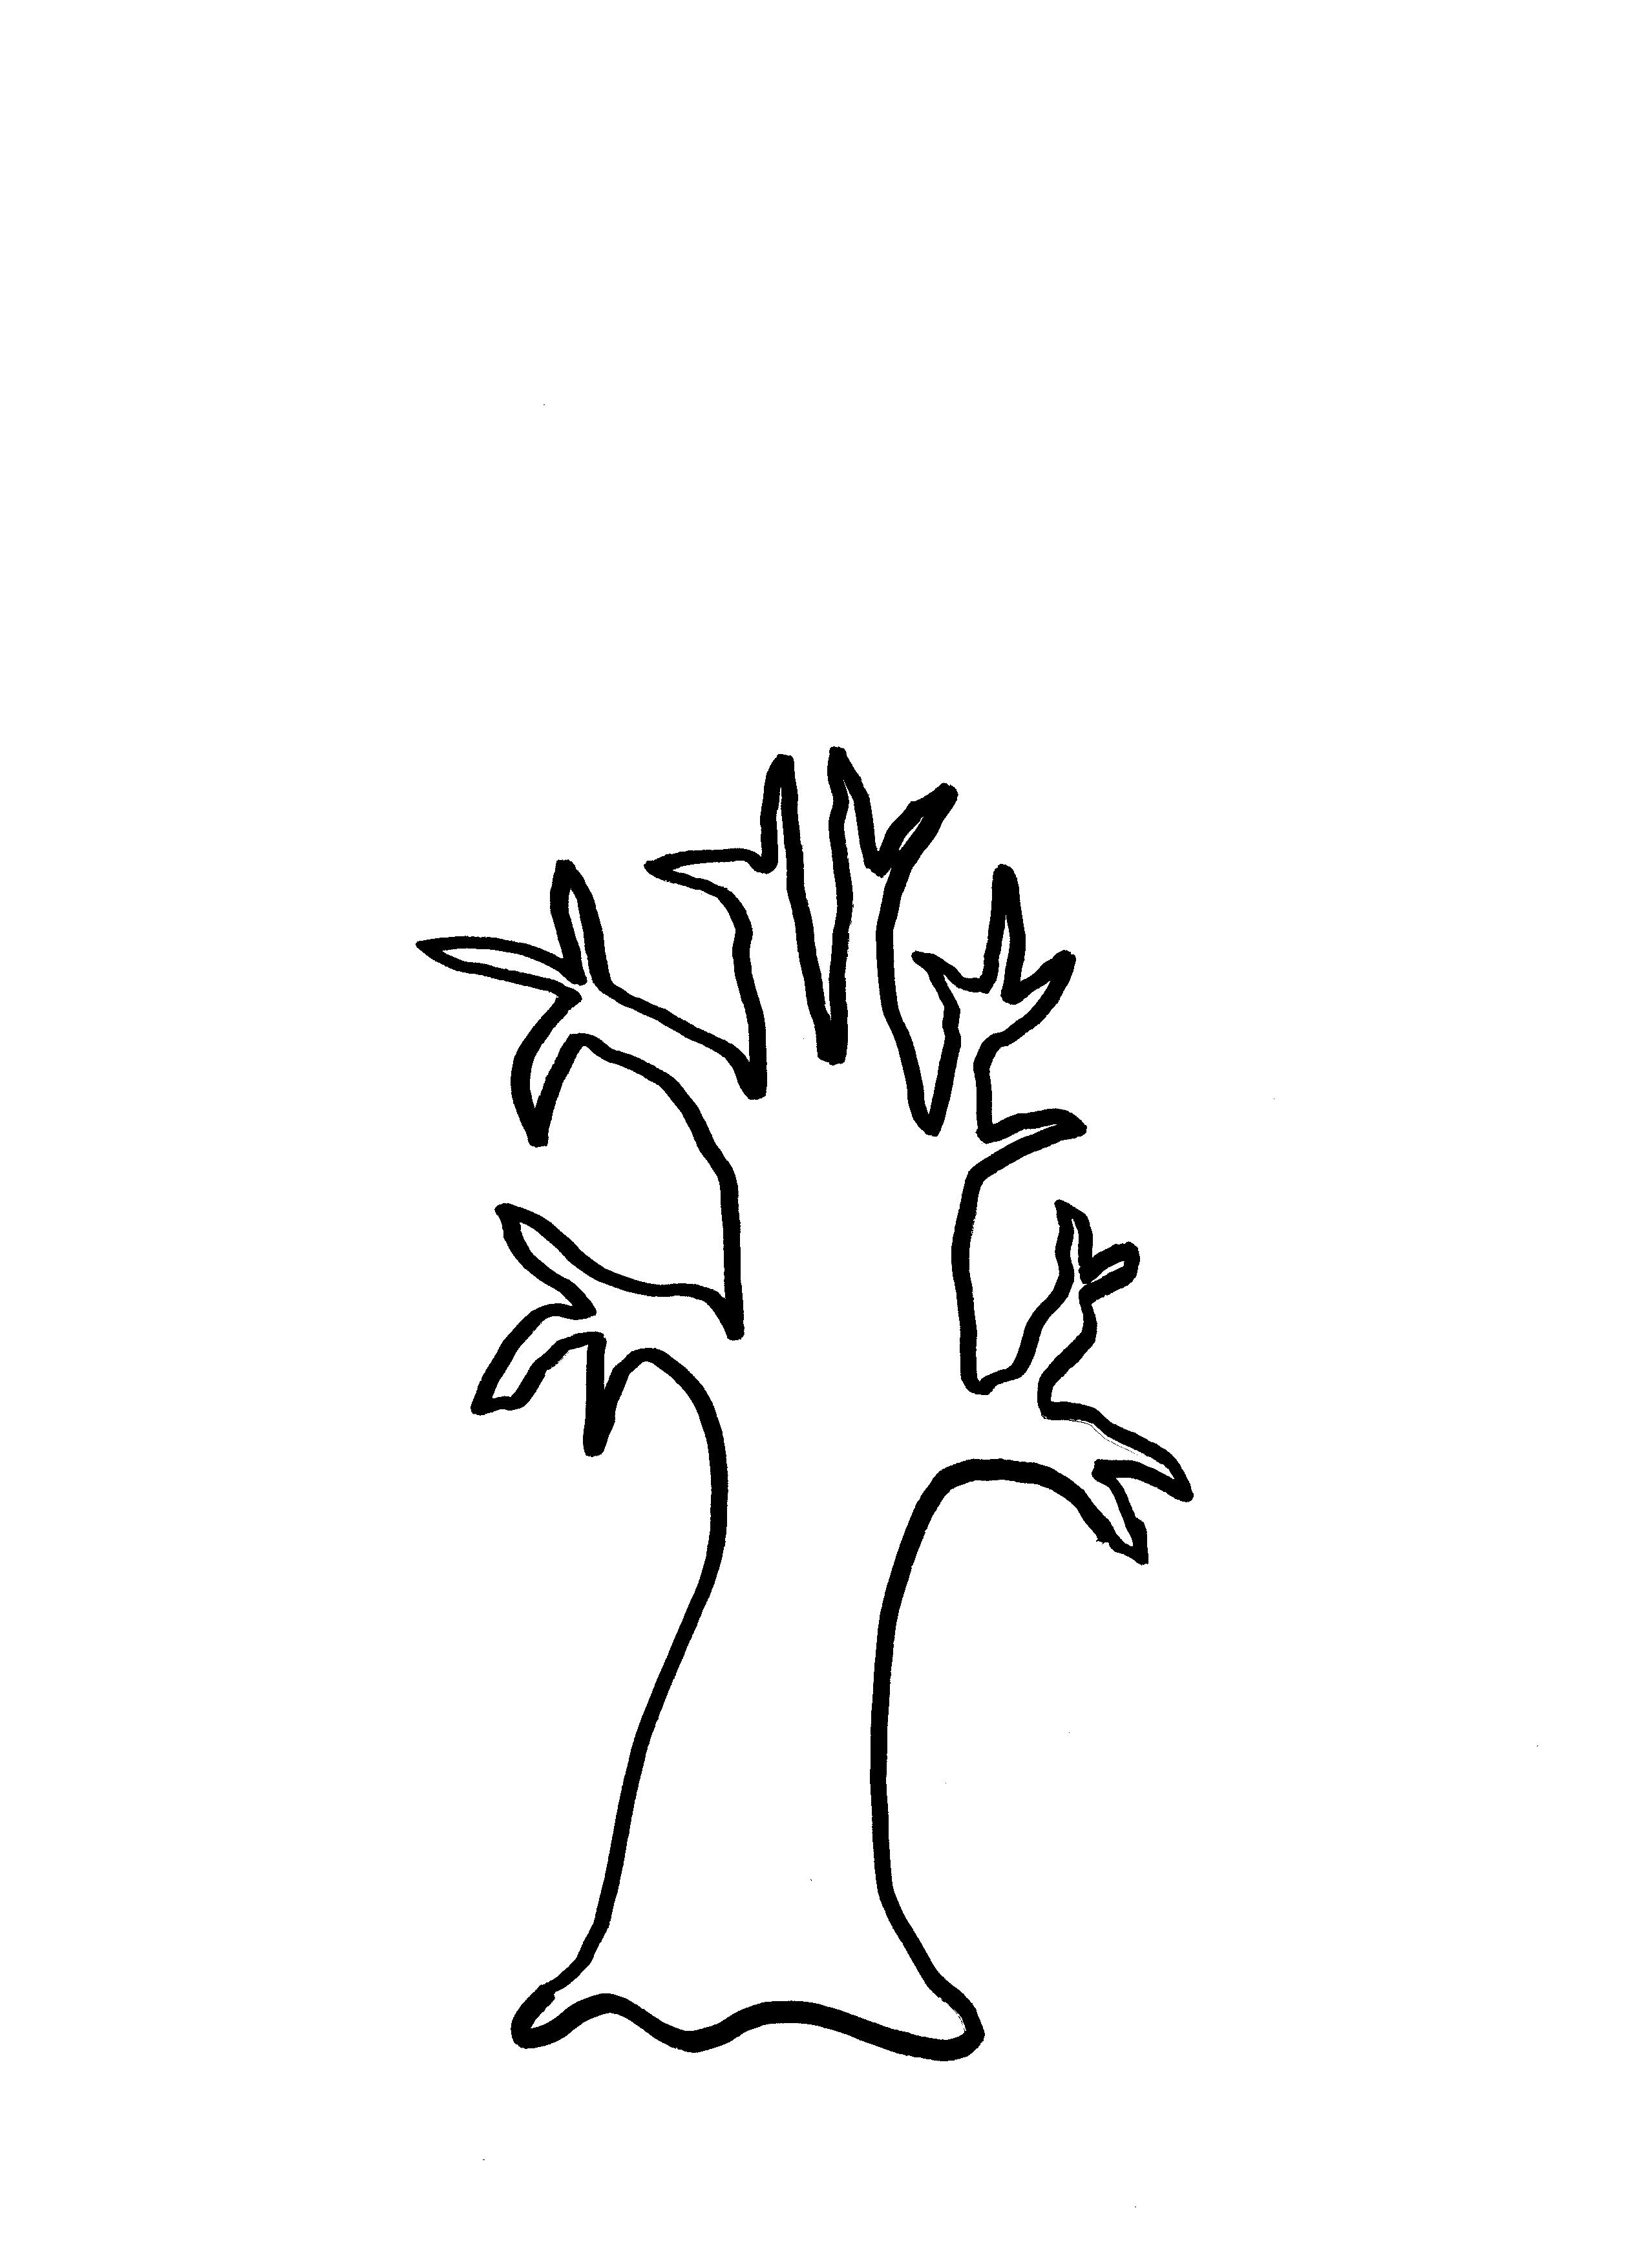 Fall Tree Outline - ClipArt Best